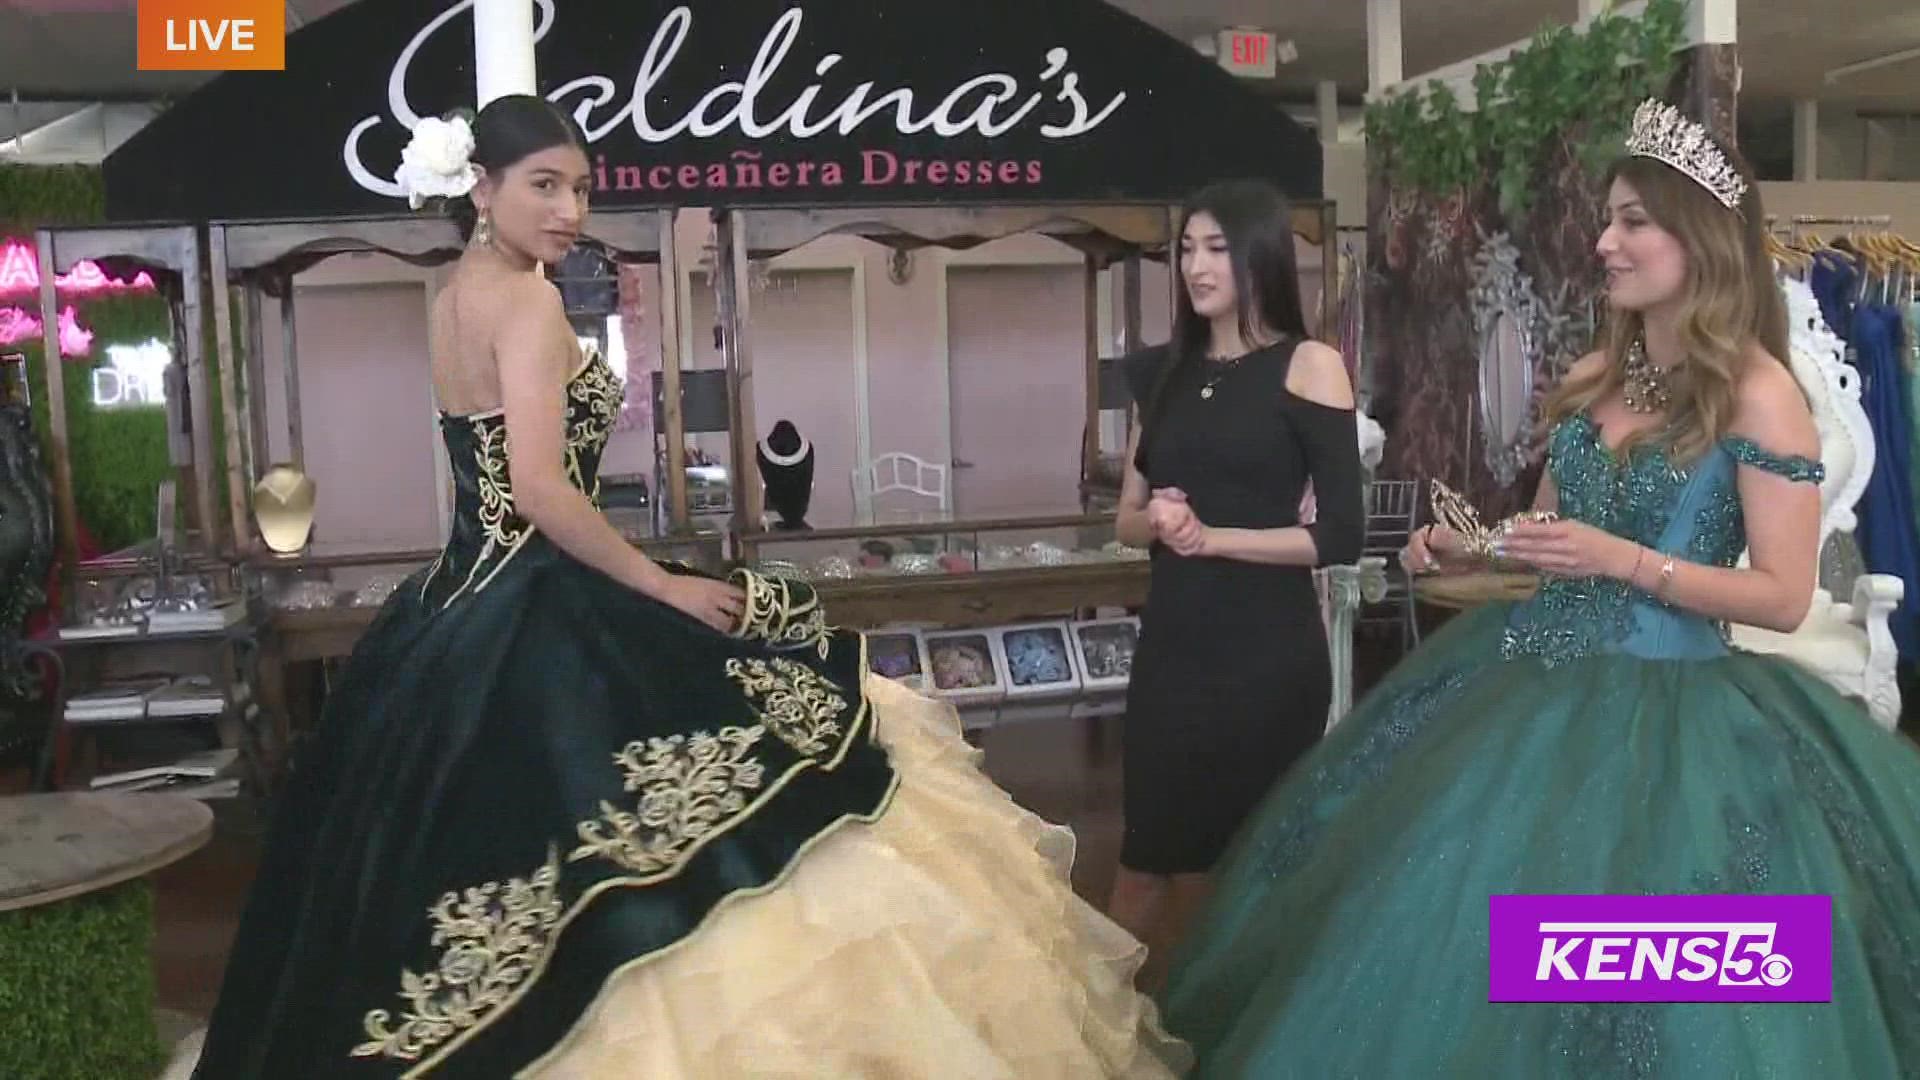 Galdina's Dresses is a family business with a local history and wide selection of quinceañera dresses